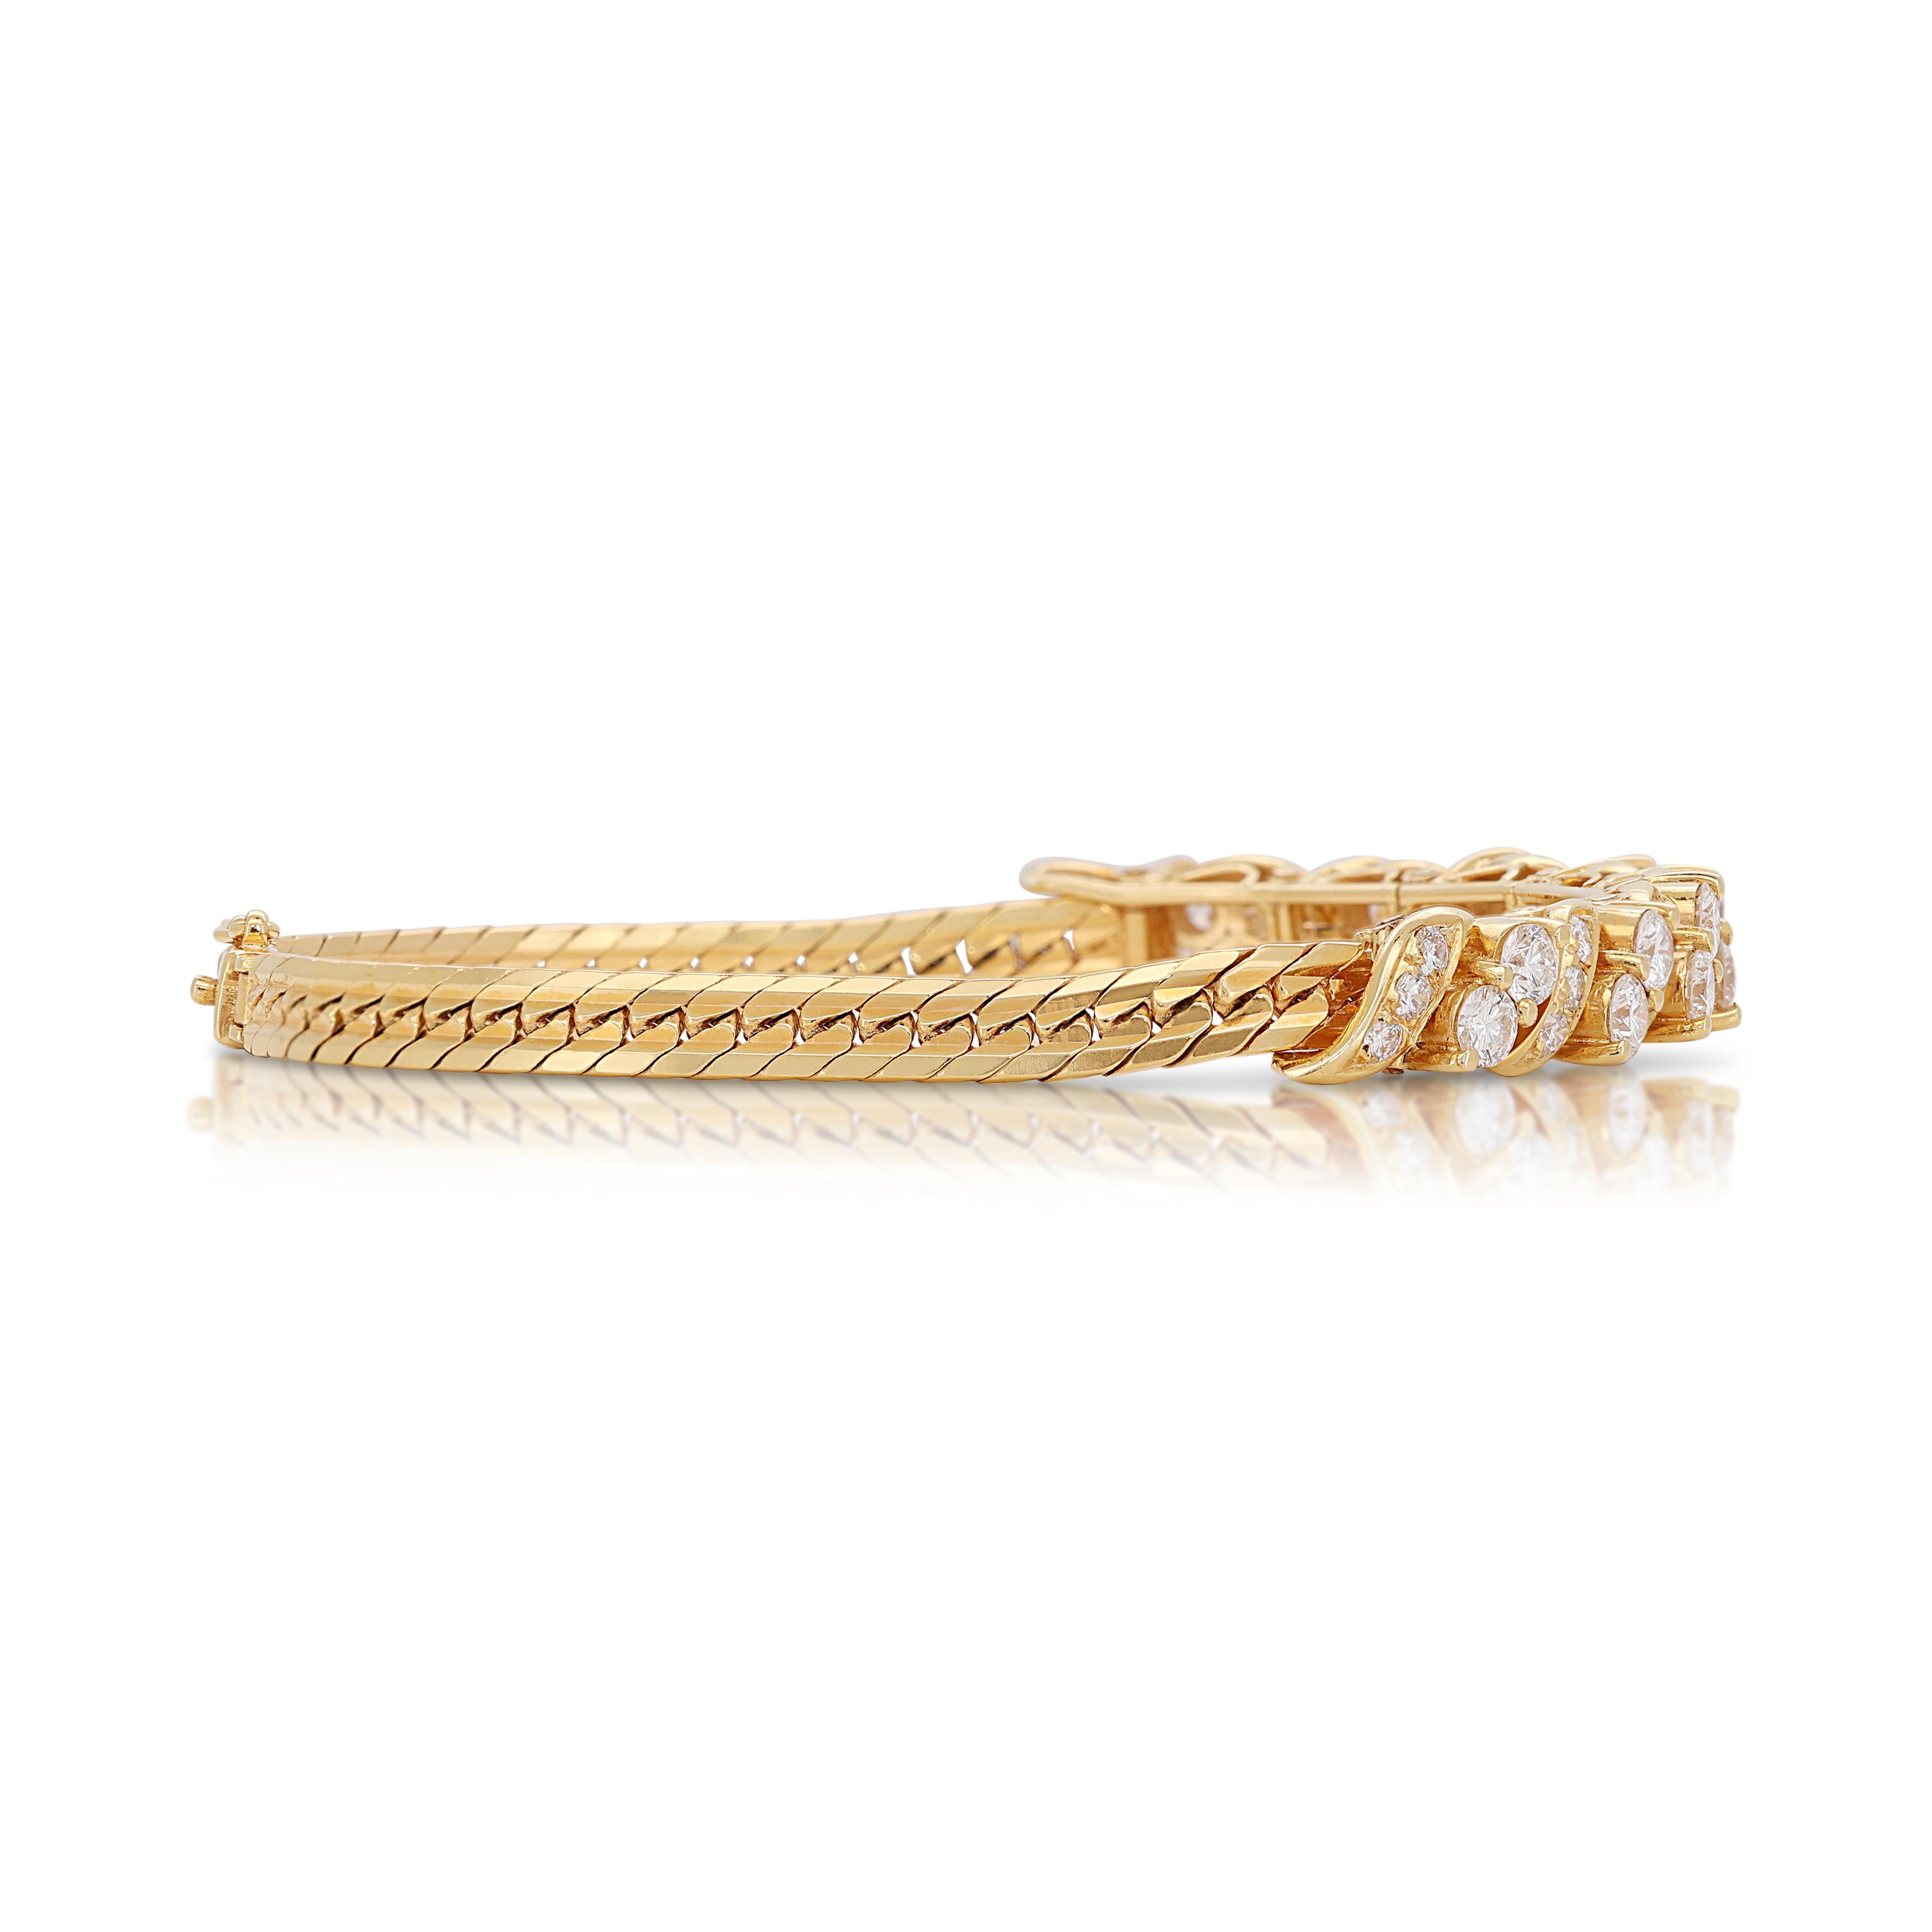 Round Cut Sophisticated 1.87ct Diamonds Bracelet in 20k Yellow Gold For Sale